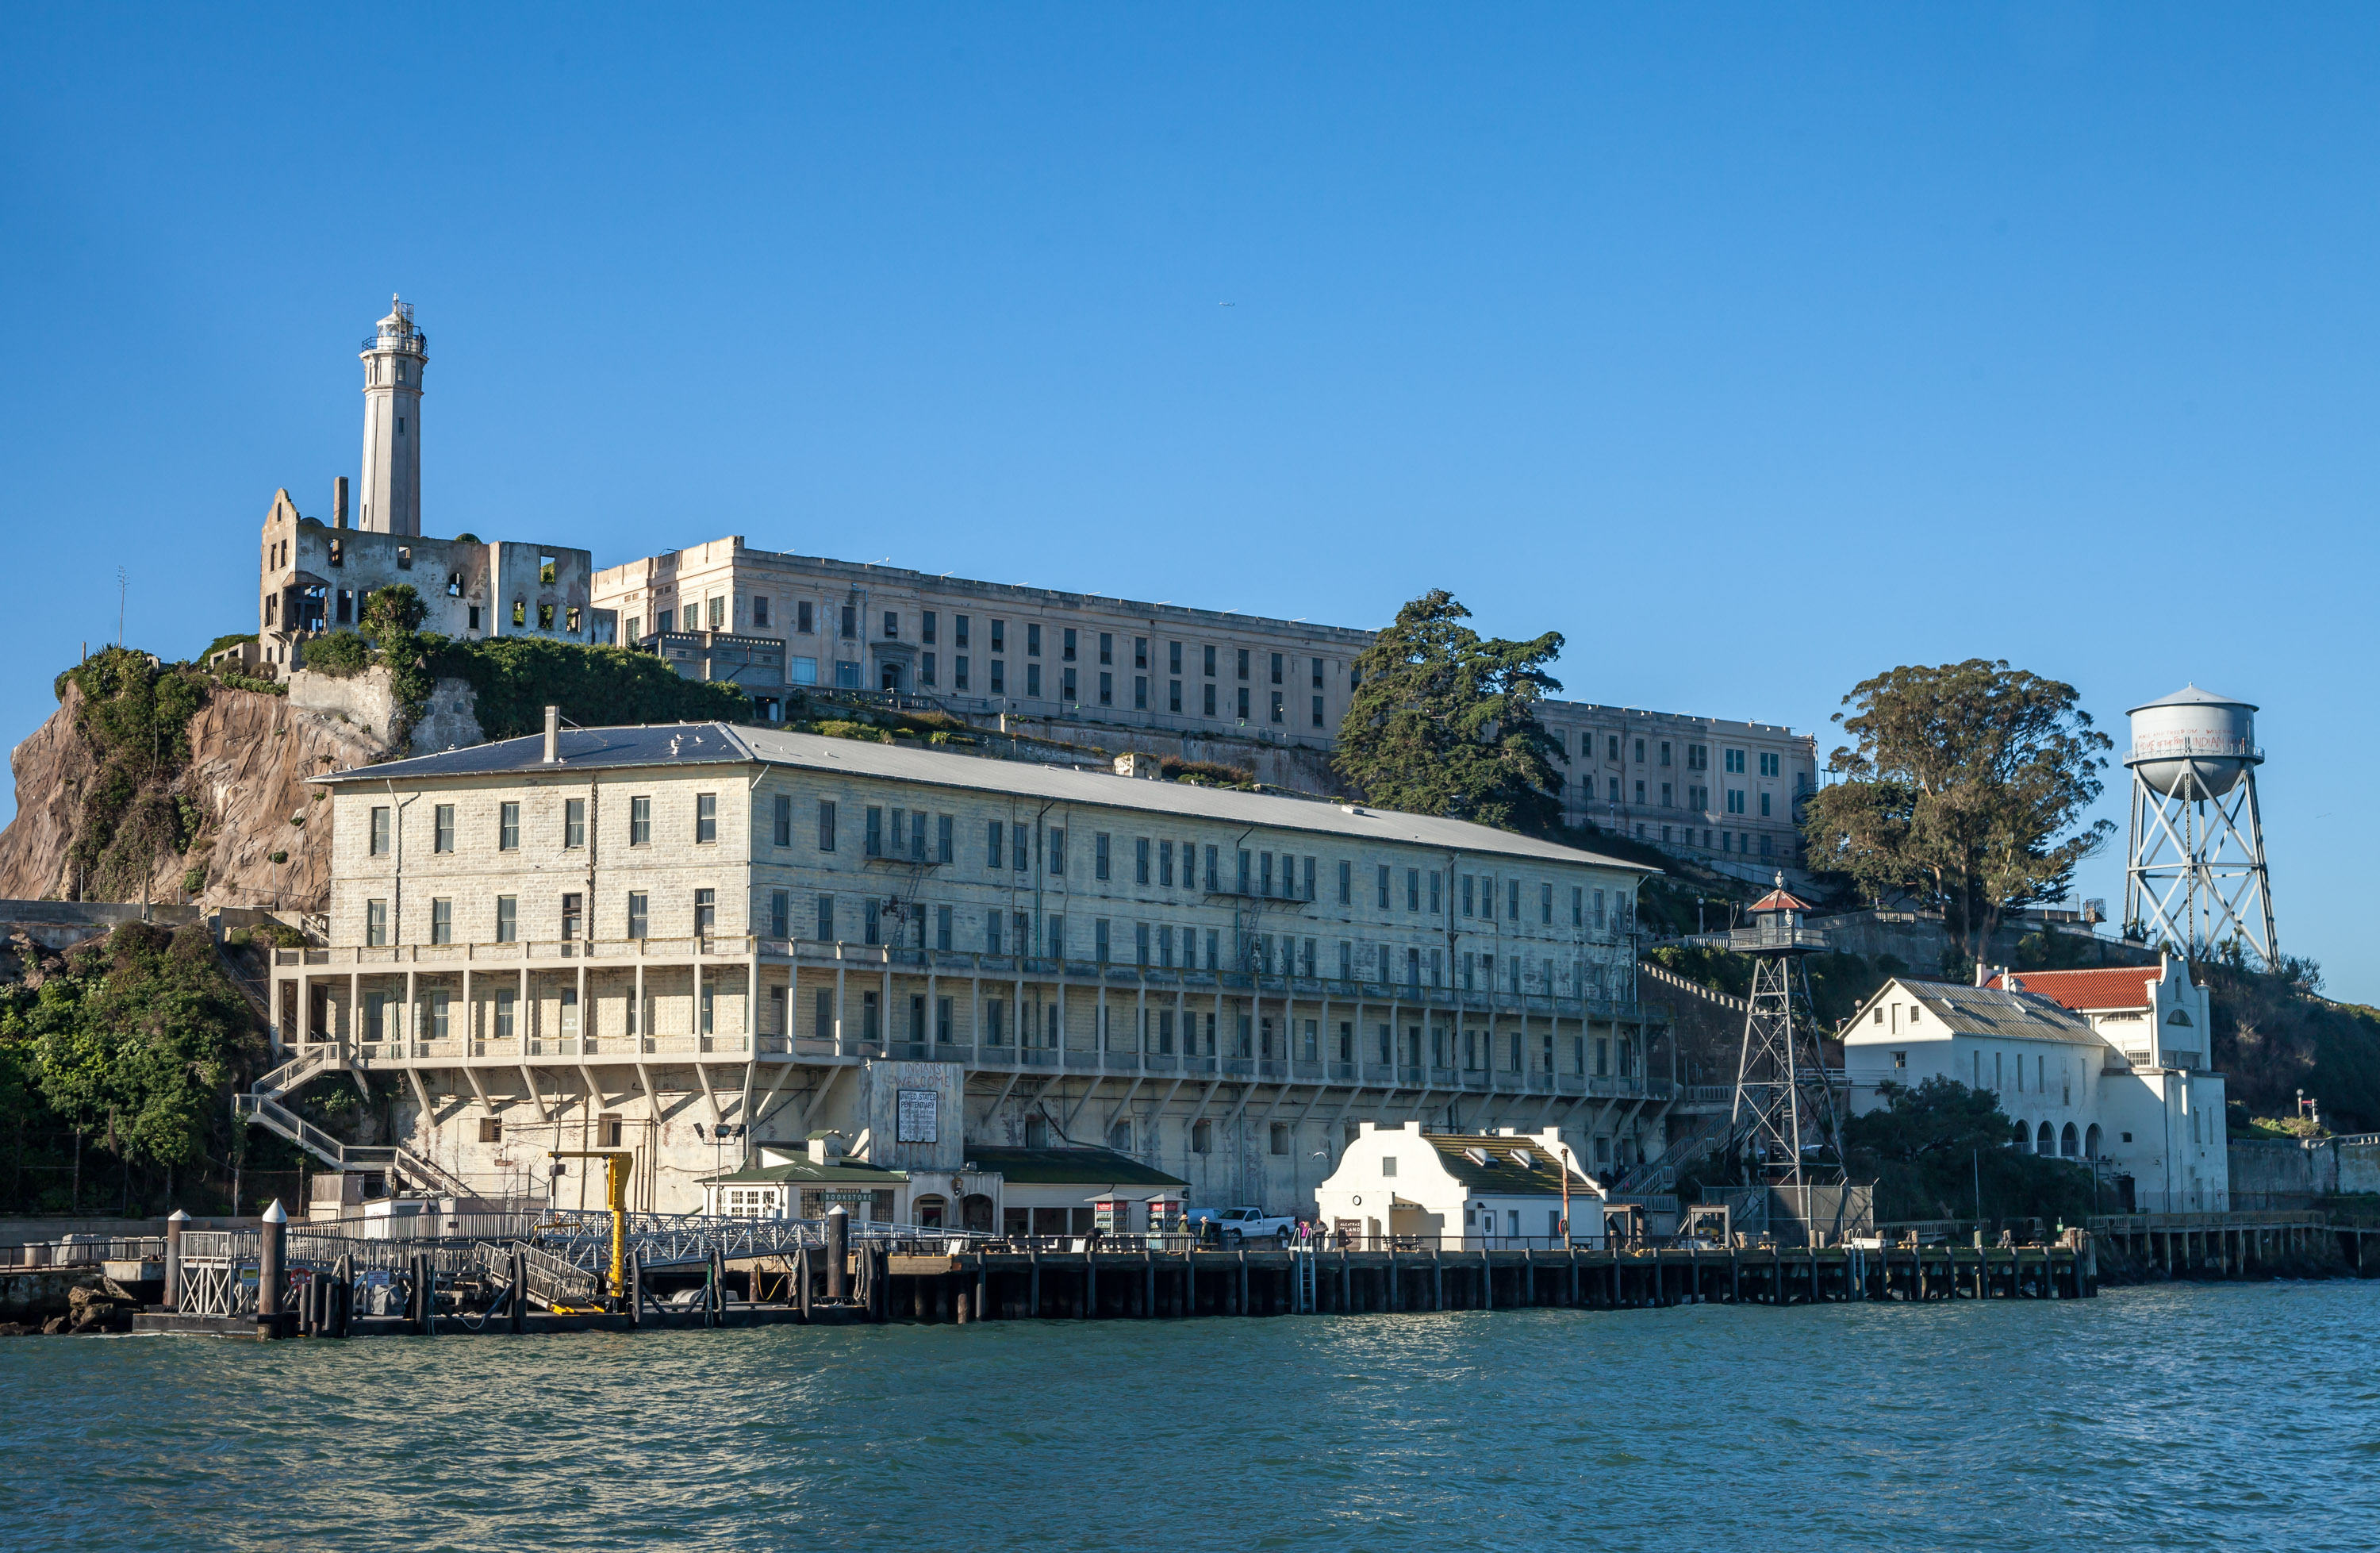 A view of the dock at Alcatraz Island with the cell house and lighthouse in the background